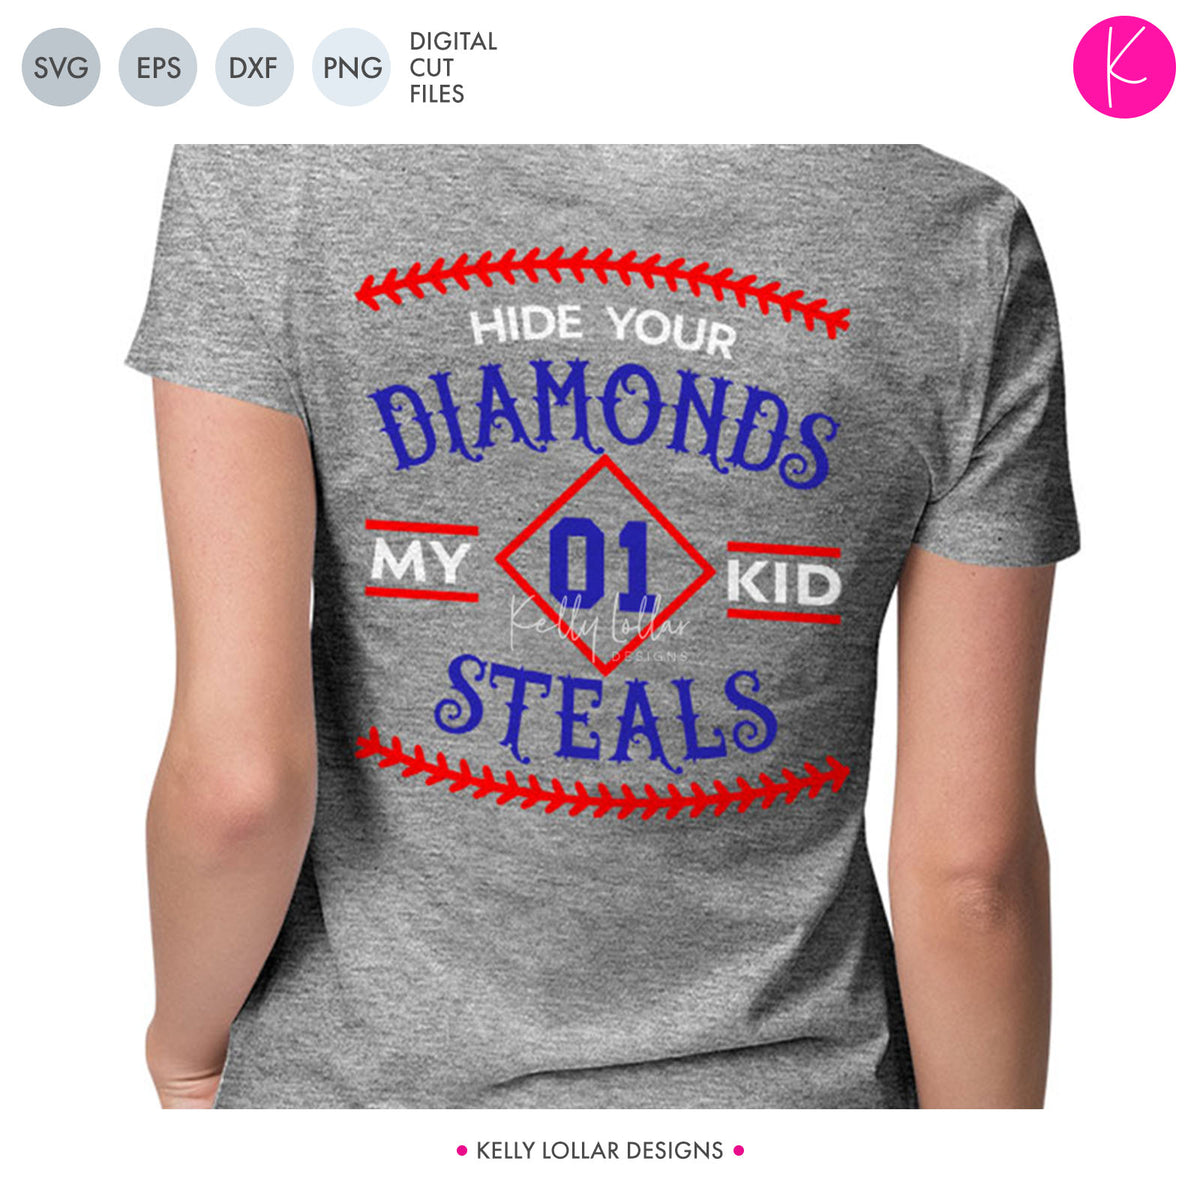 Hide Your Diamonds My Kid Steals | SVG DXF EPS PNG Cut Files